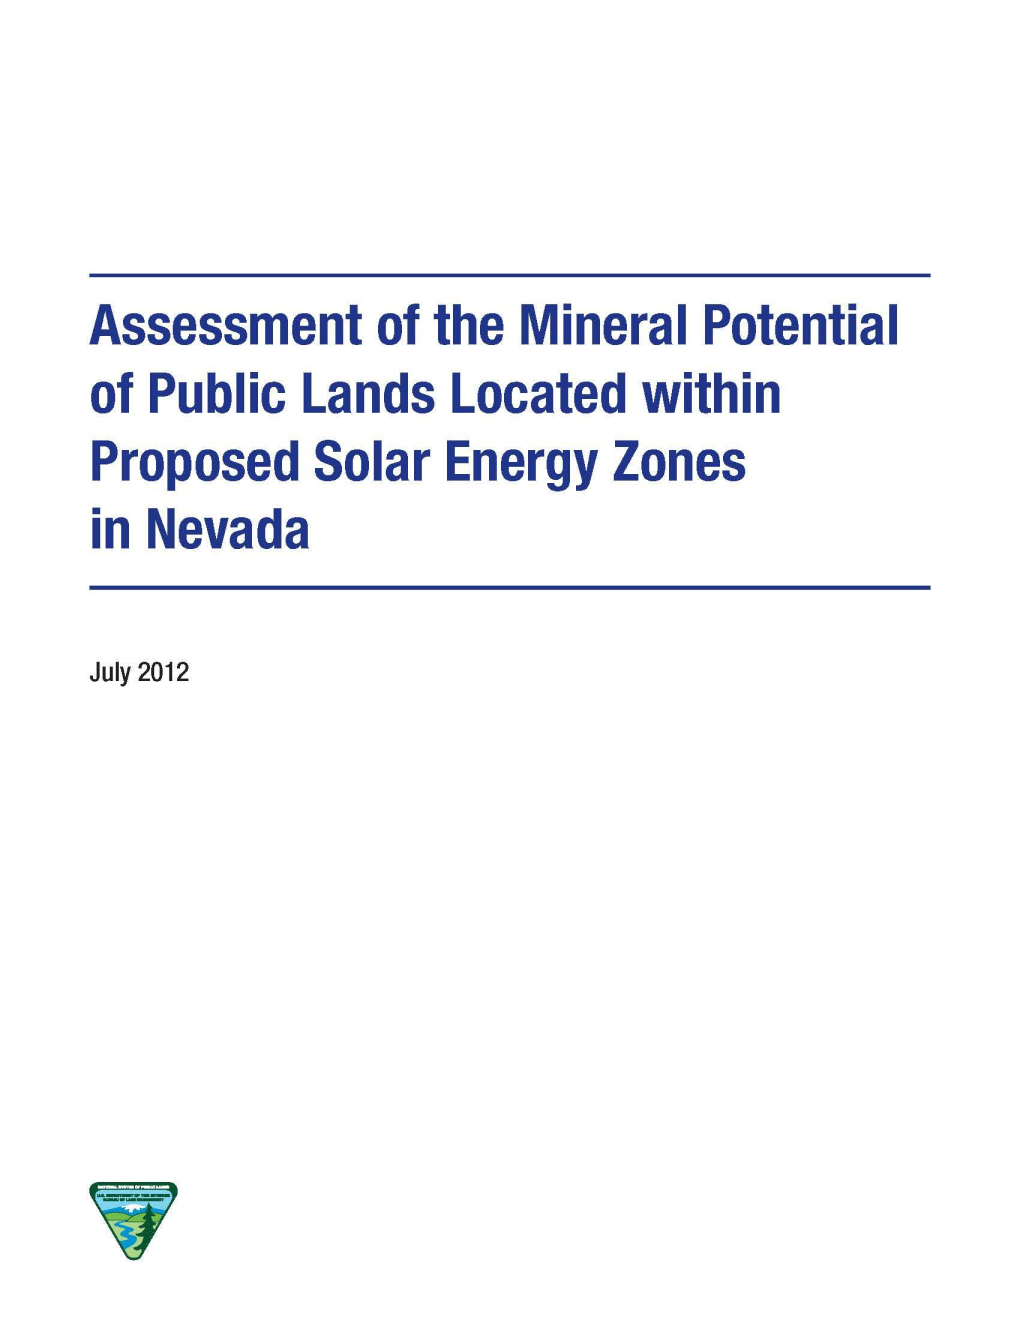 Assessment of the Mineral Potential of Public Lands Located Within Proposed Solar Energy Zones in Nevada